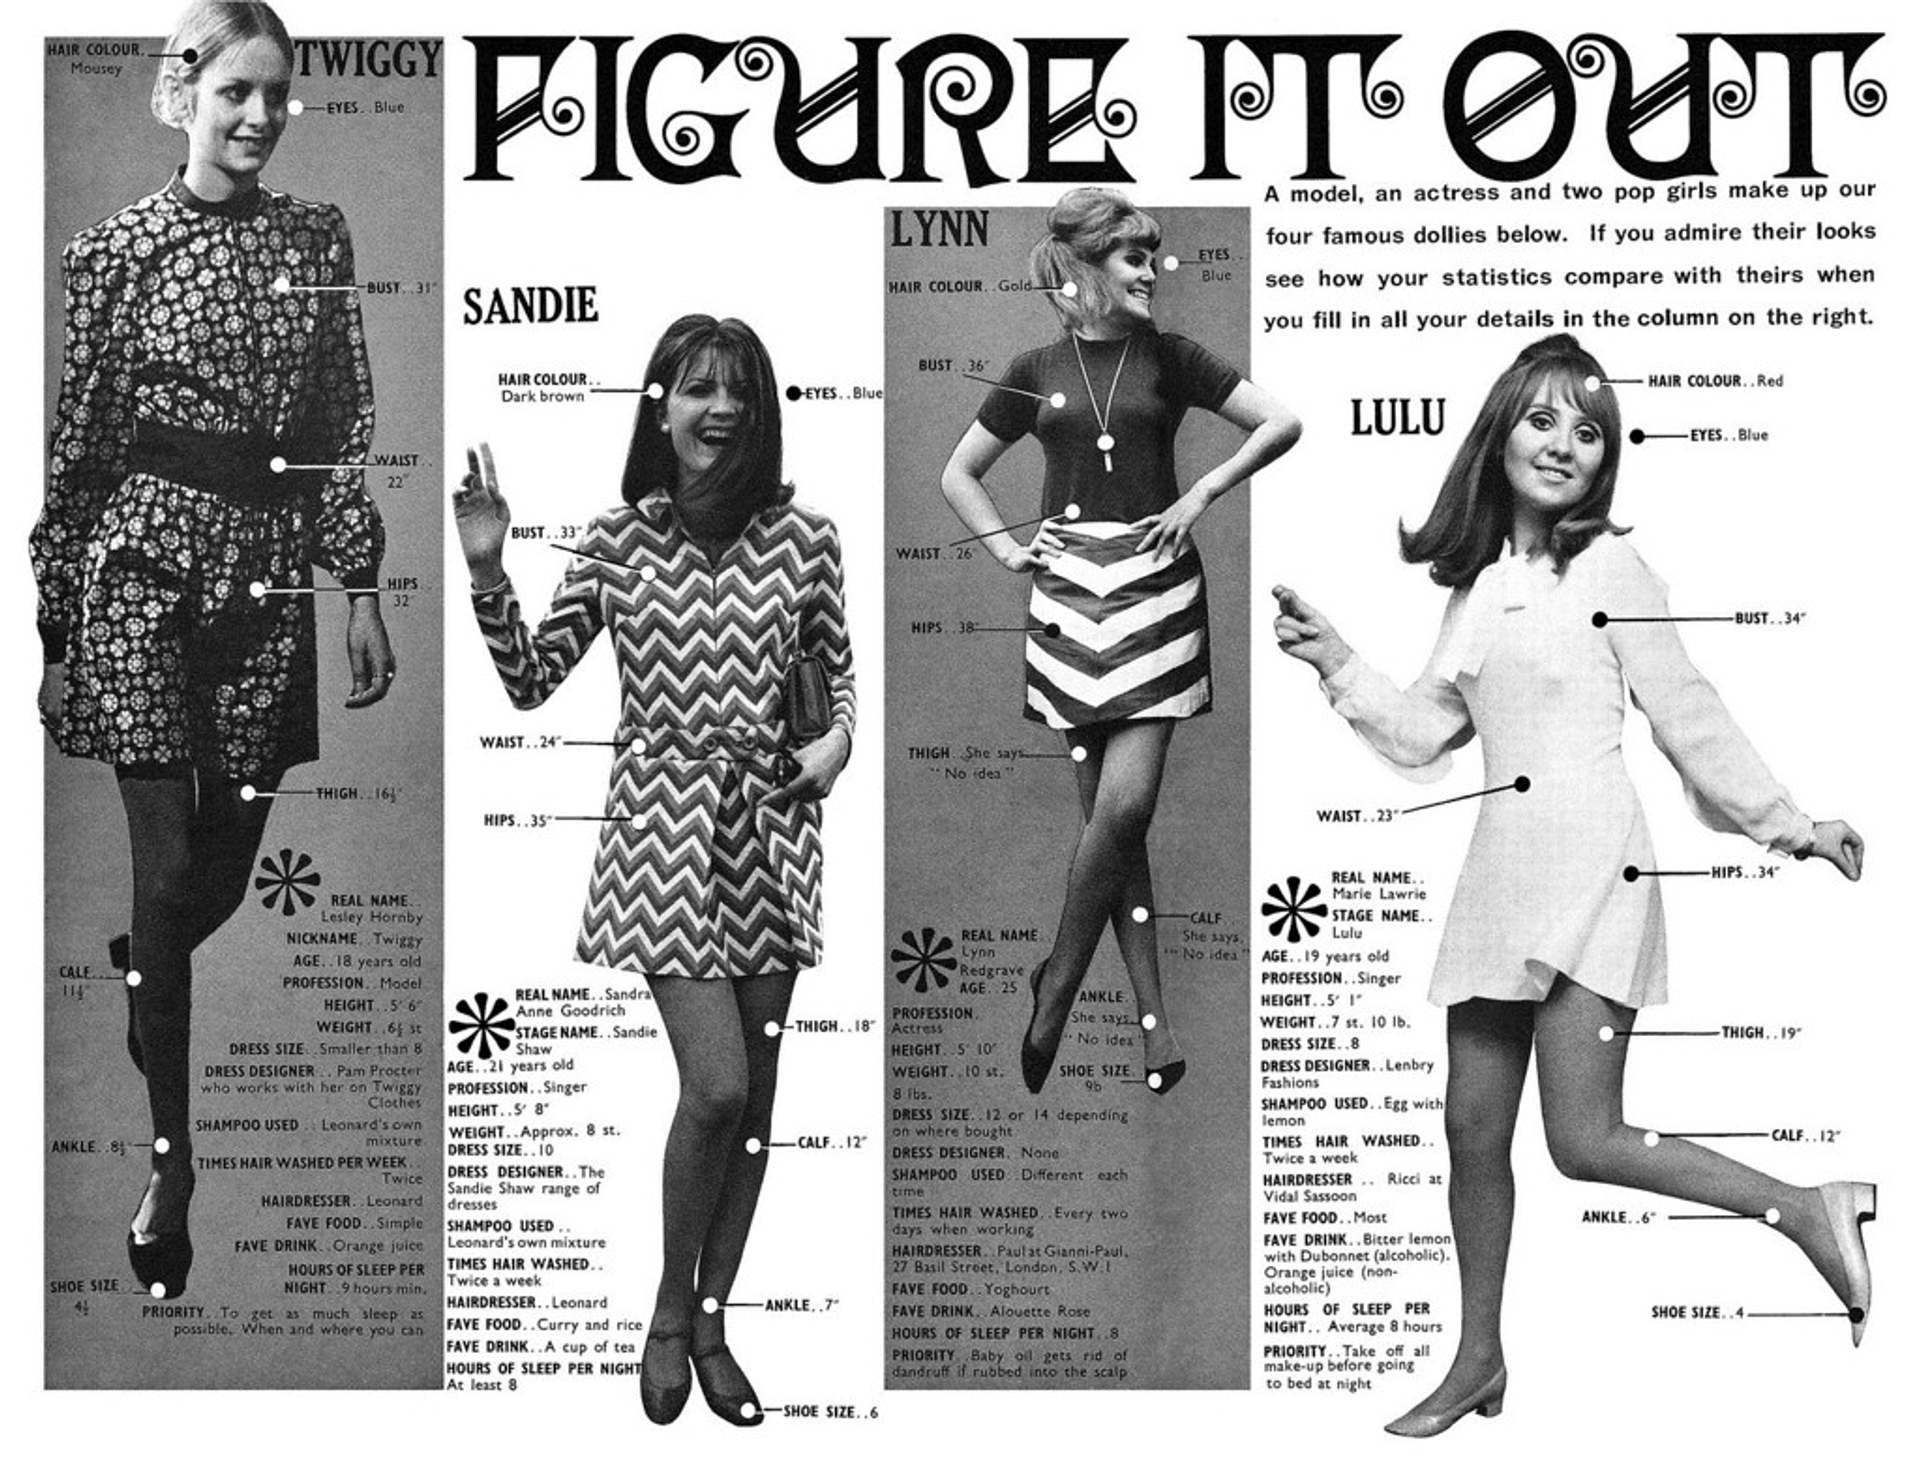 A monochrome scan of a 1960s fashion magazine, showing four models in psychedelic designs.